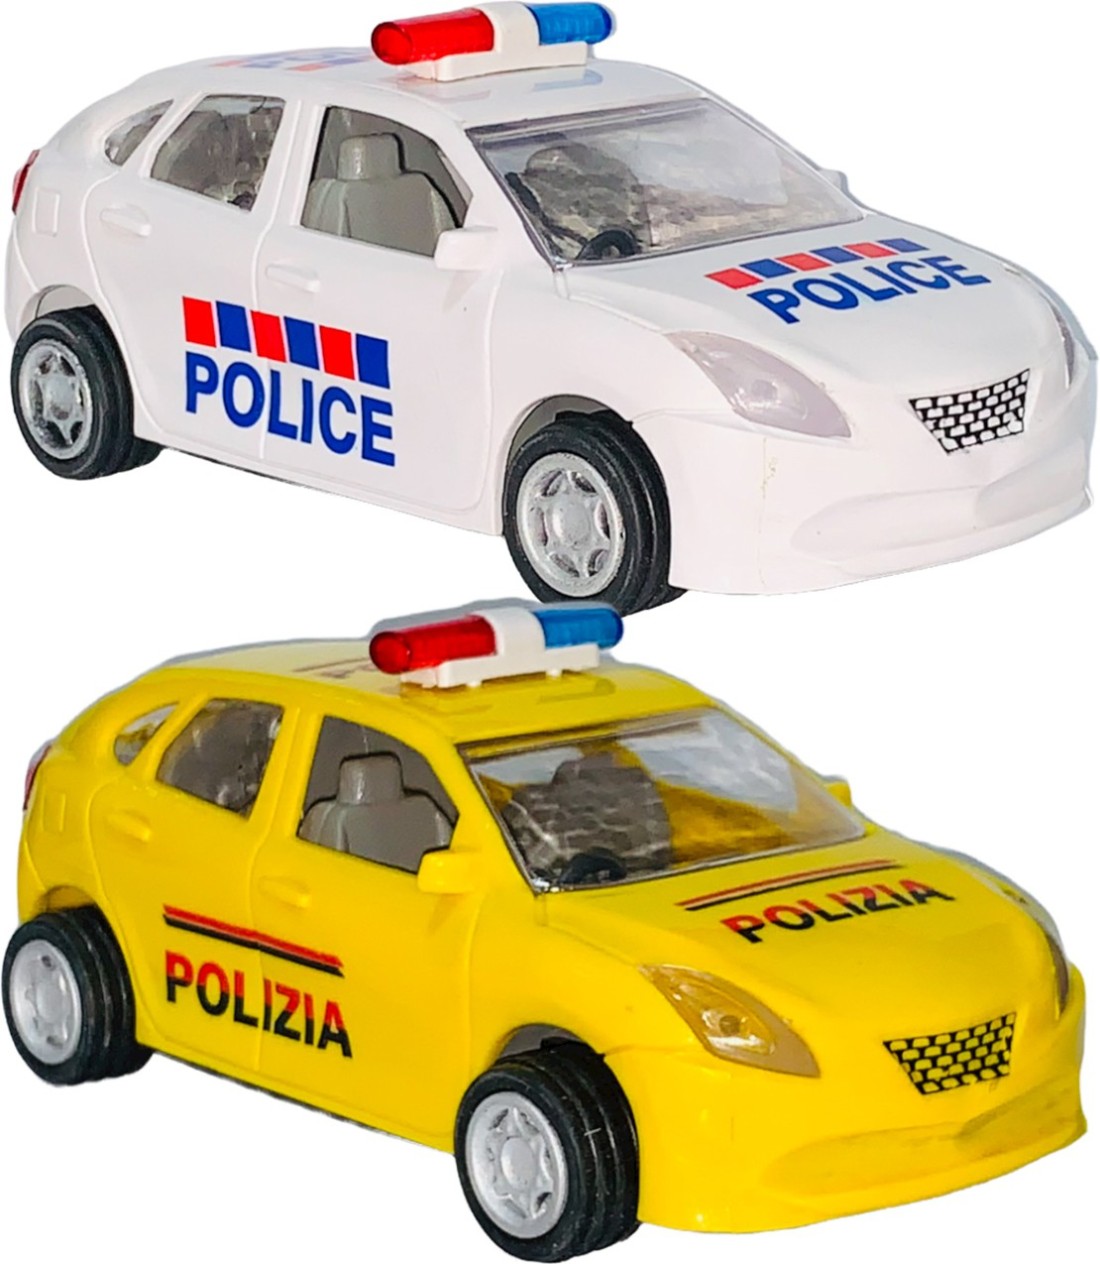 Wishmaster Pack Of 2 Kids Small Size Pull Back Police Toy Car Made Of  Plastic For Kids - Pack Of 2 Kids Small Size Pull Back Police Toy Car Made  Of Plastic